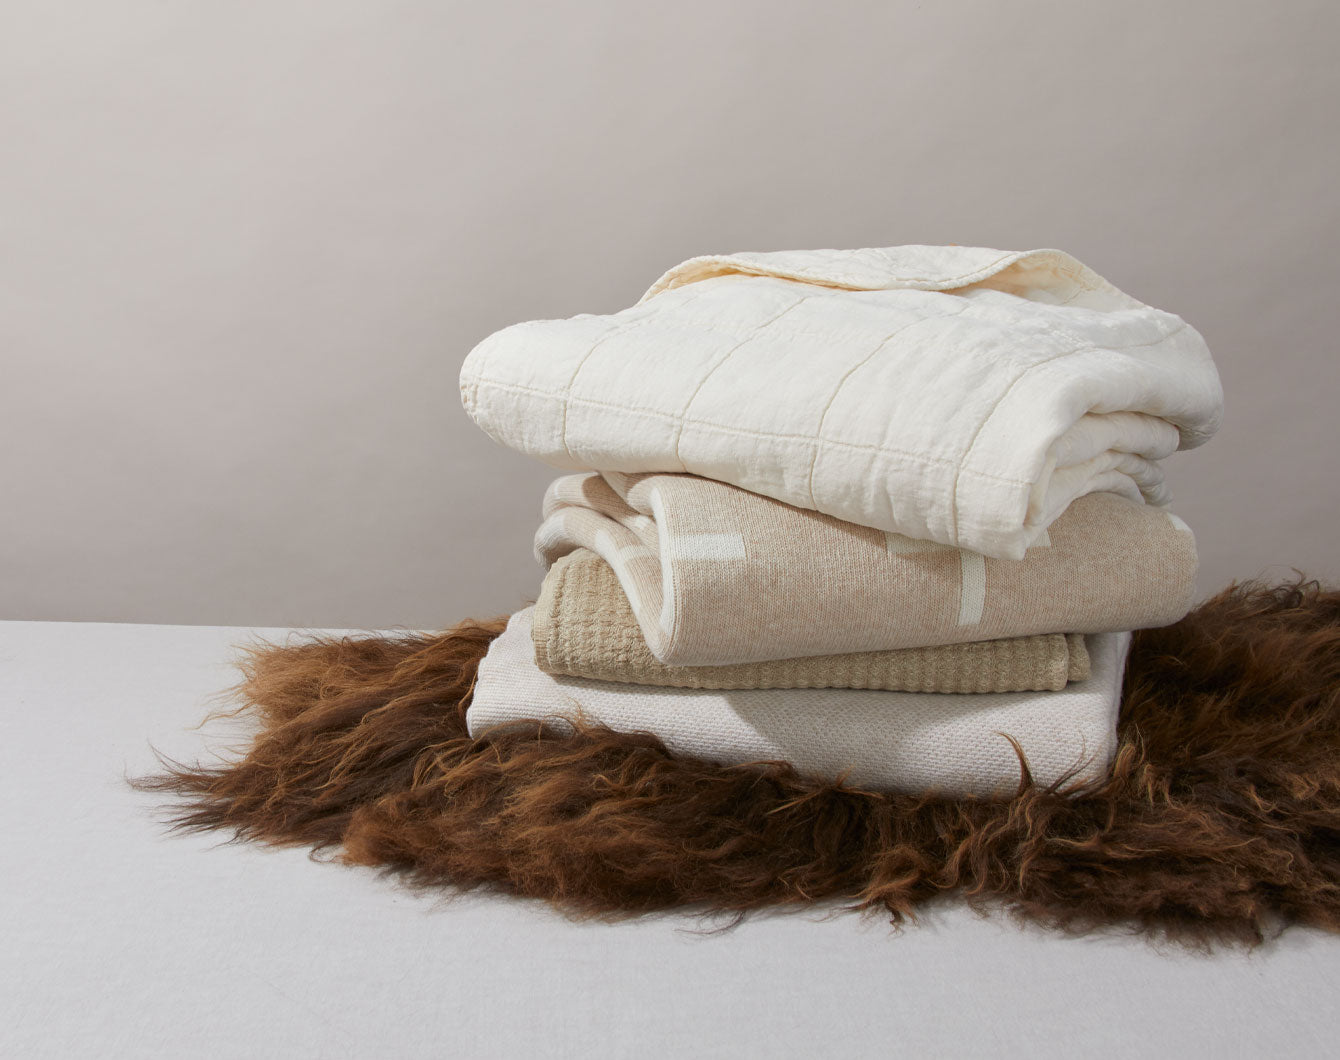 stack of ivory and flax colored throws on a brown sheepskin rug